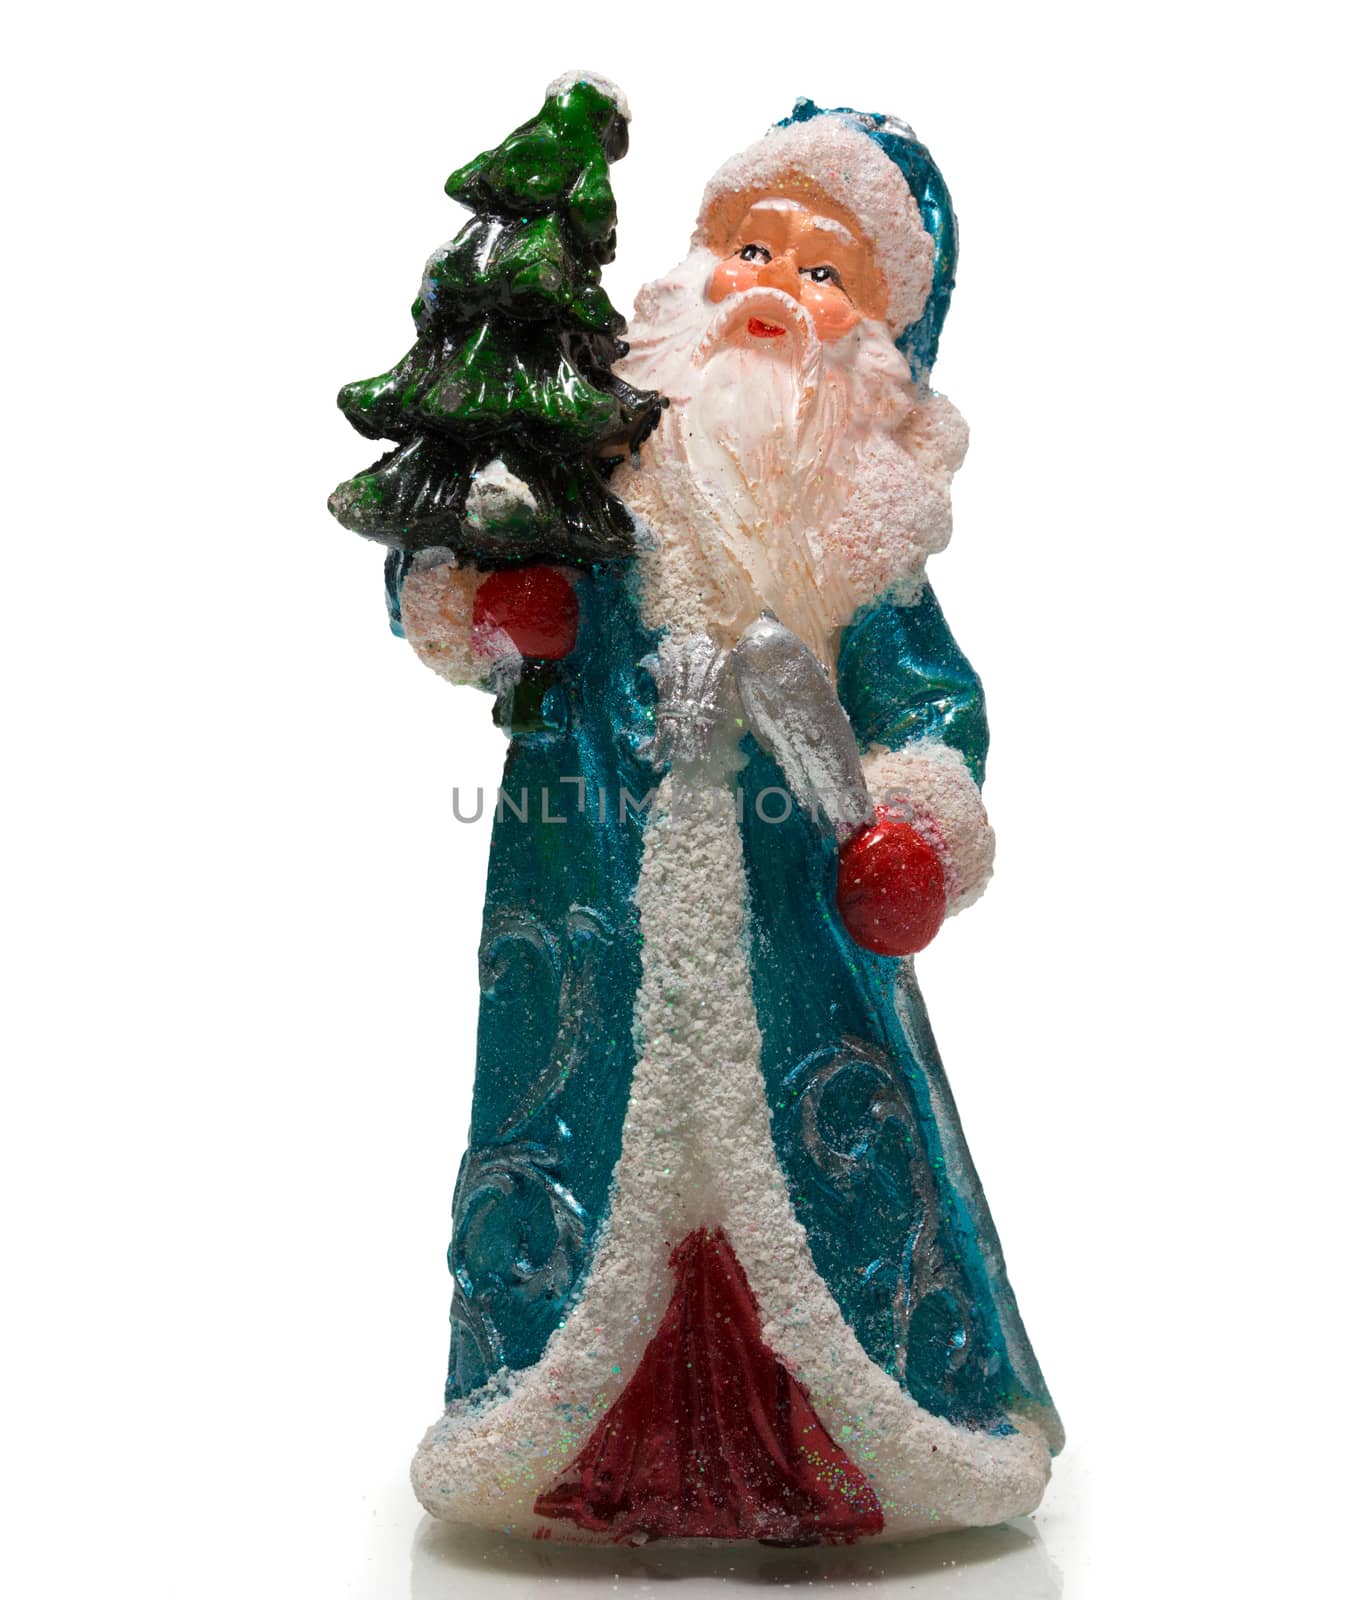 The photograph depicts Santa Claus with Christmas tree